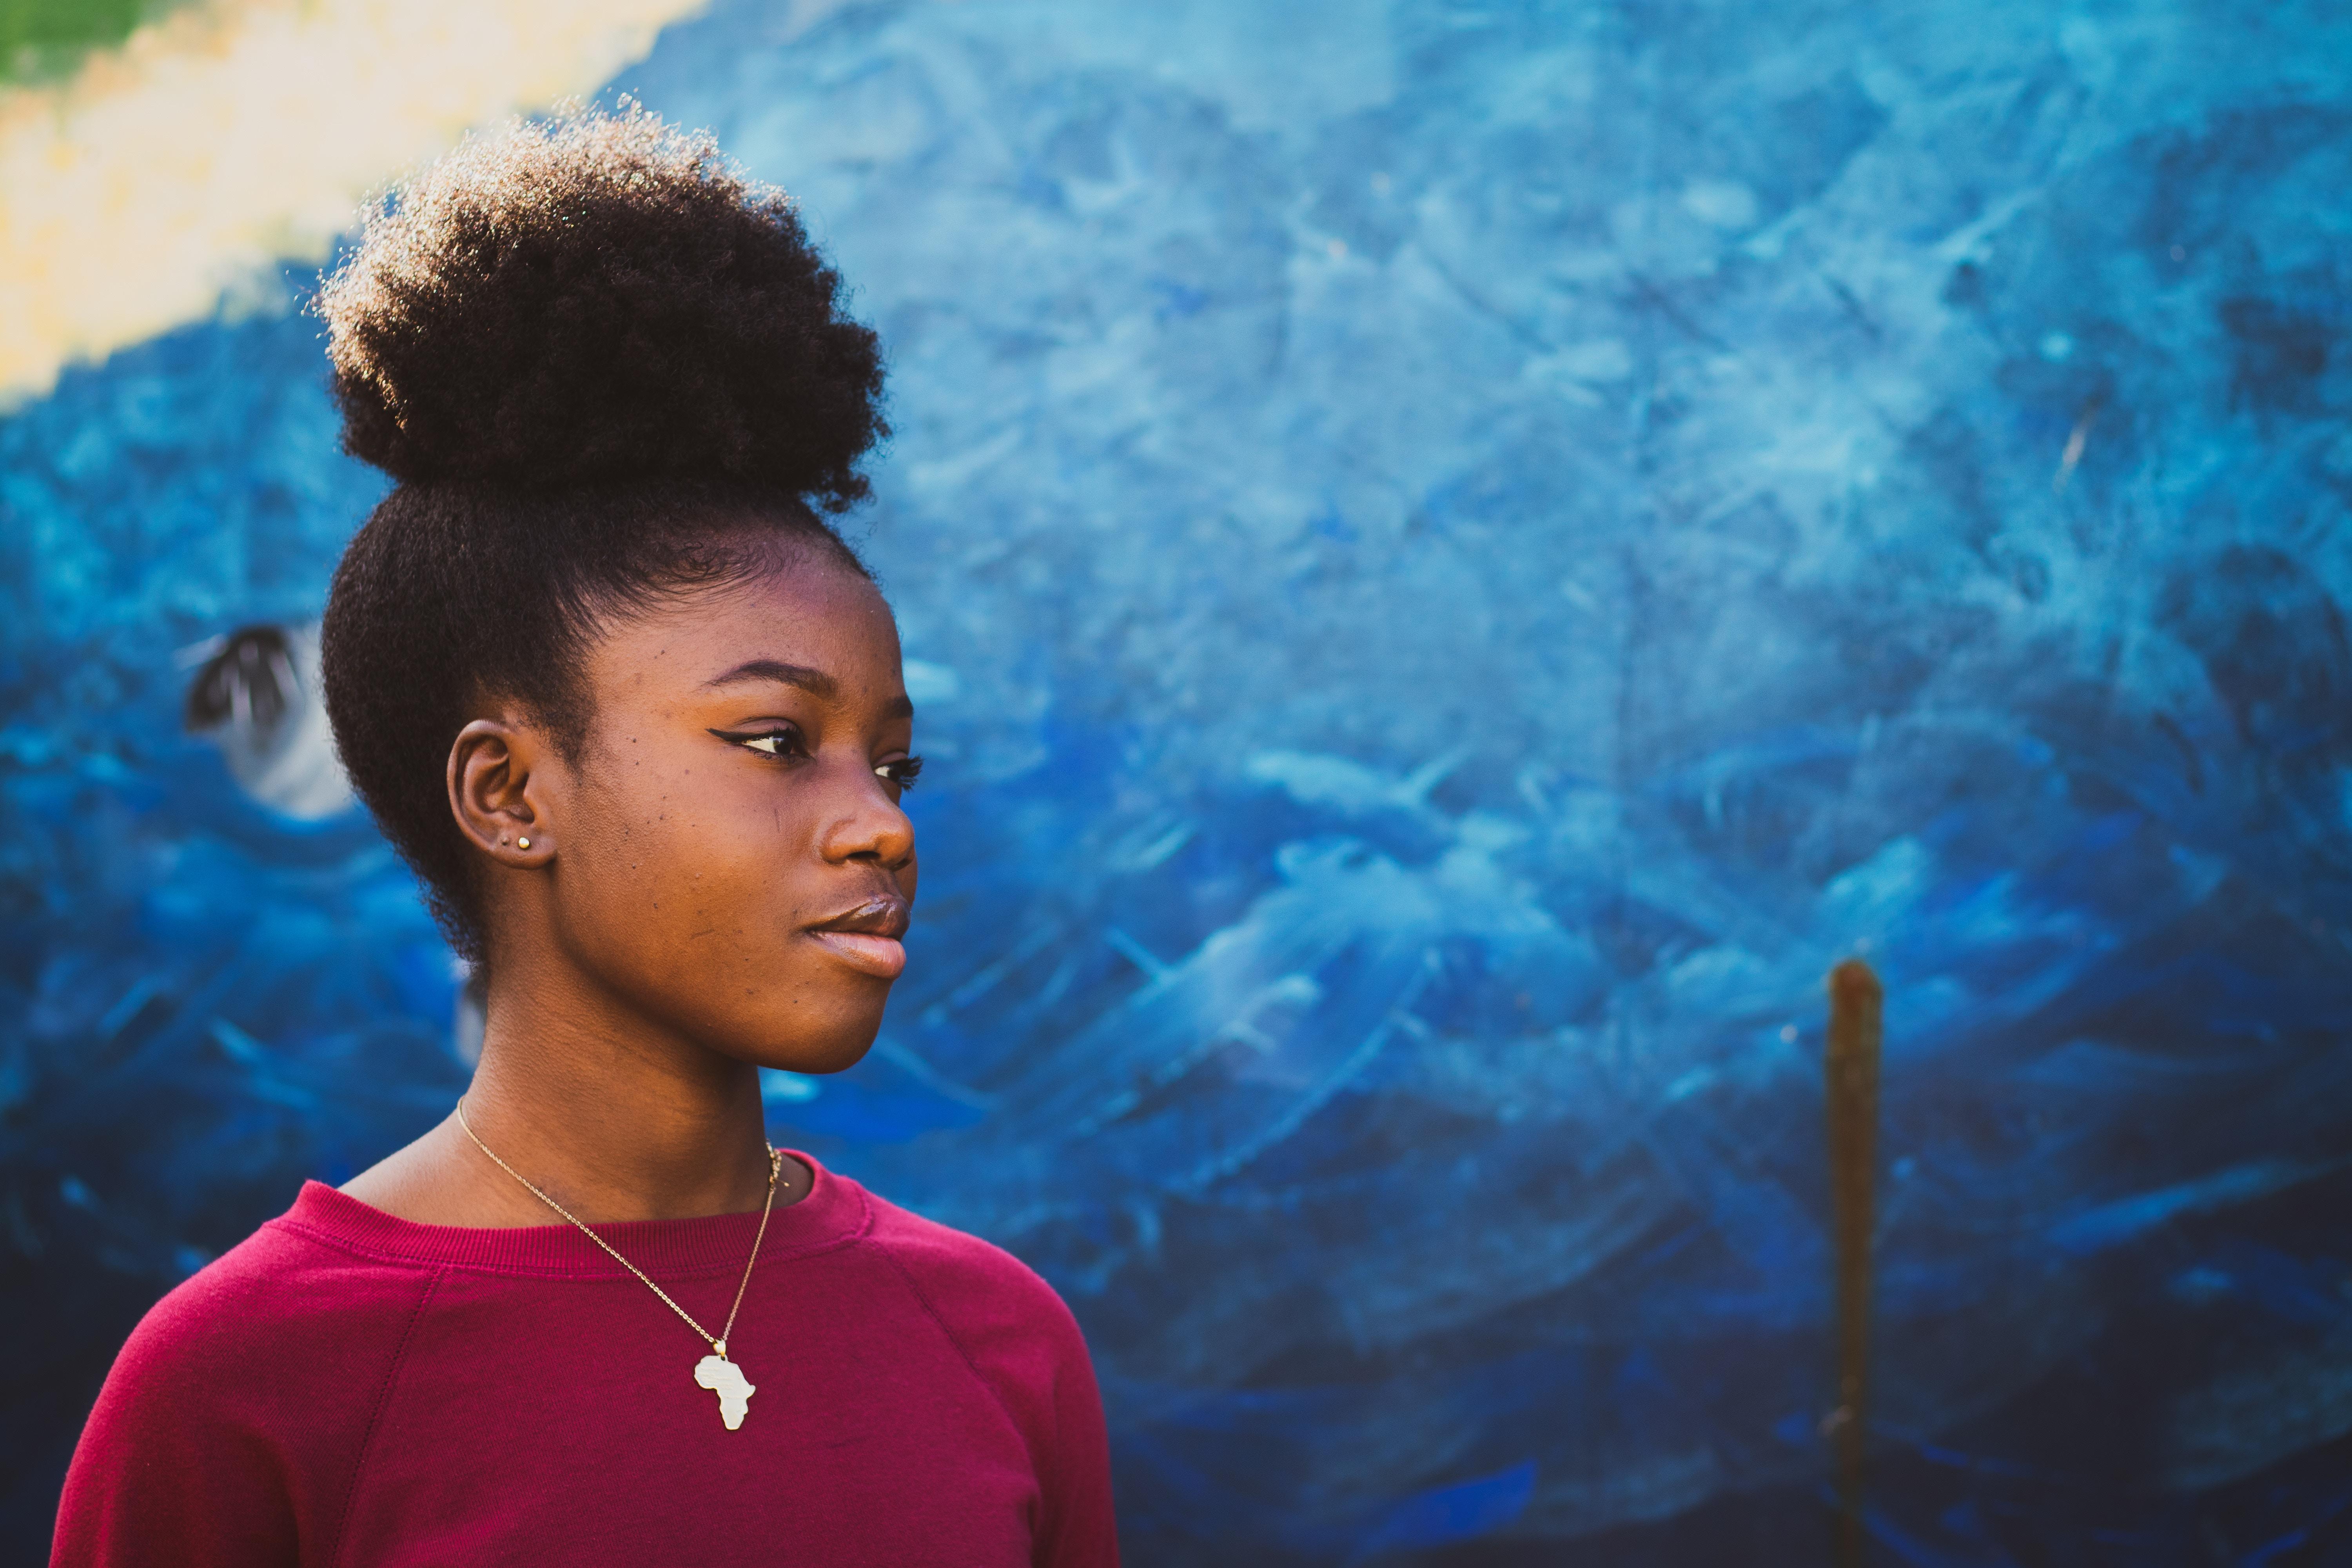 6000x4000 #woman, #mural, #africa pendative, #black girl, #Creative Commons image, #blue background, #black, #female, #portrait, #looking away, #afro hair, #african american, #girl, #mural background, #afro, # african